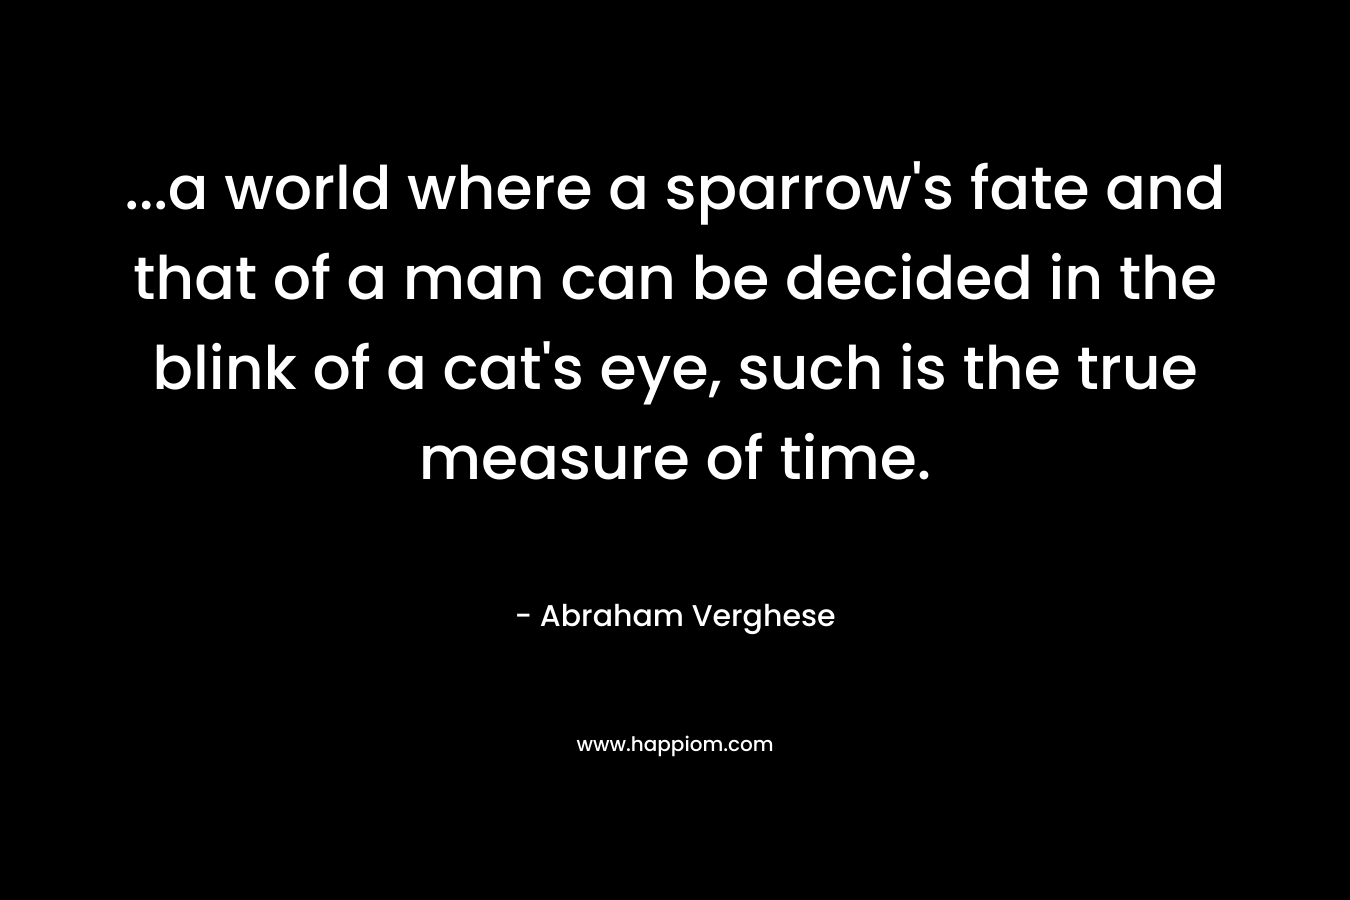 …a world where a sparrow’s fate and that of a man can be decided in the blink of a cat’s eye, such is the true measure of time. – Abraham Verghese